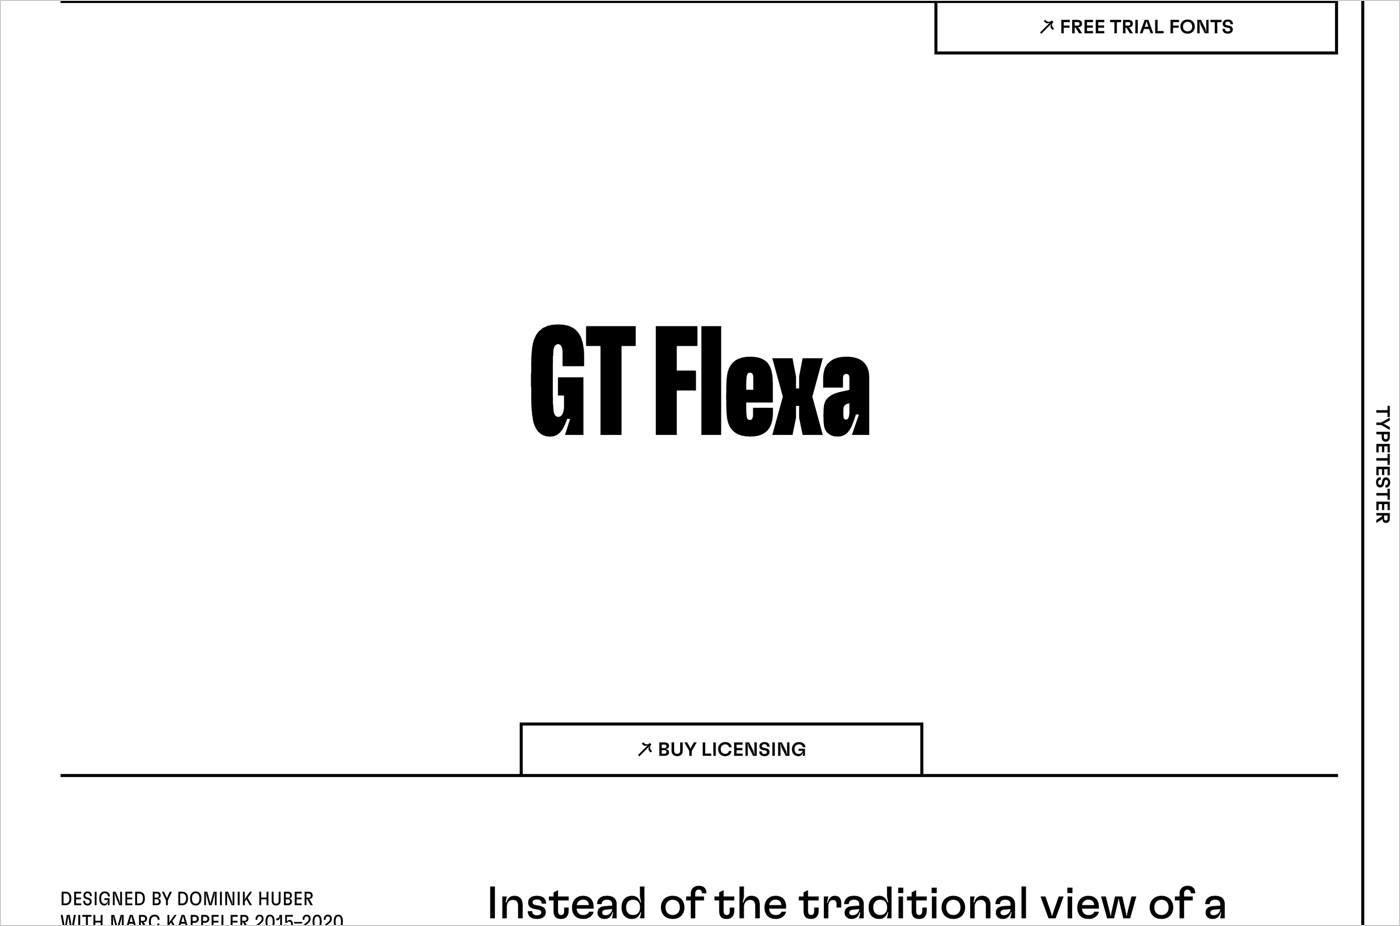 GT Flexa exclusively at Grilli Type — Download Free Trial Fontsウェブサイトの画面キャプチャ画像